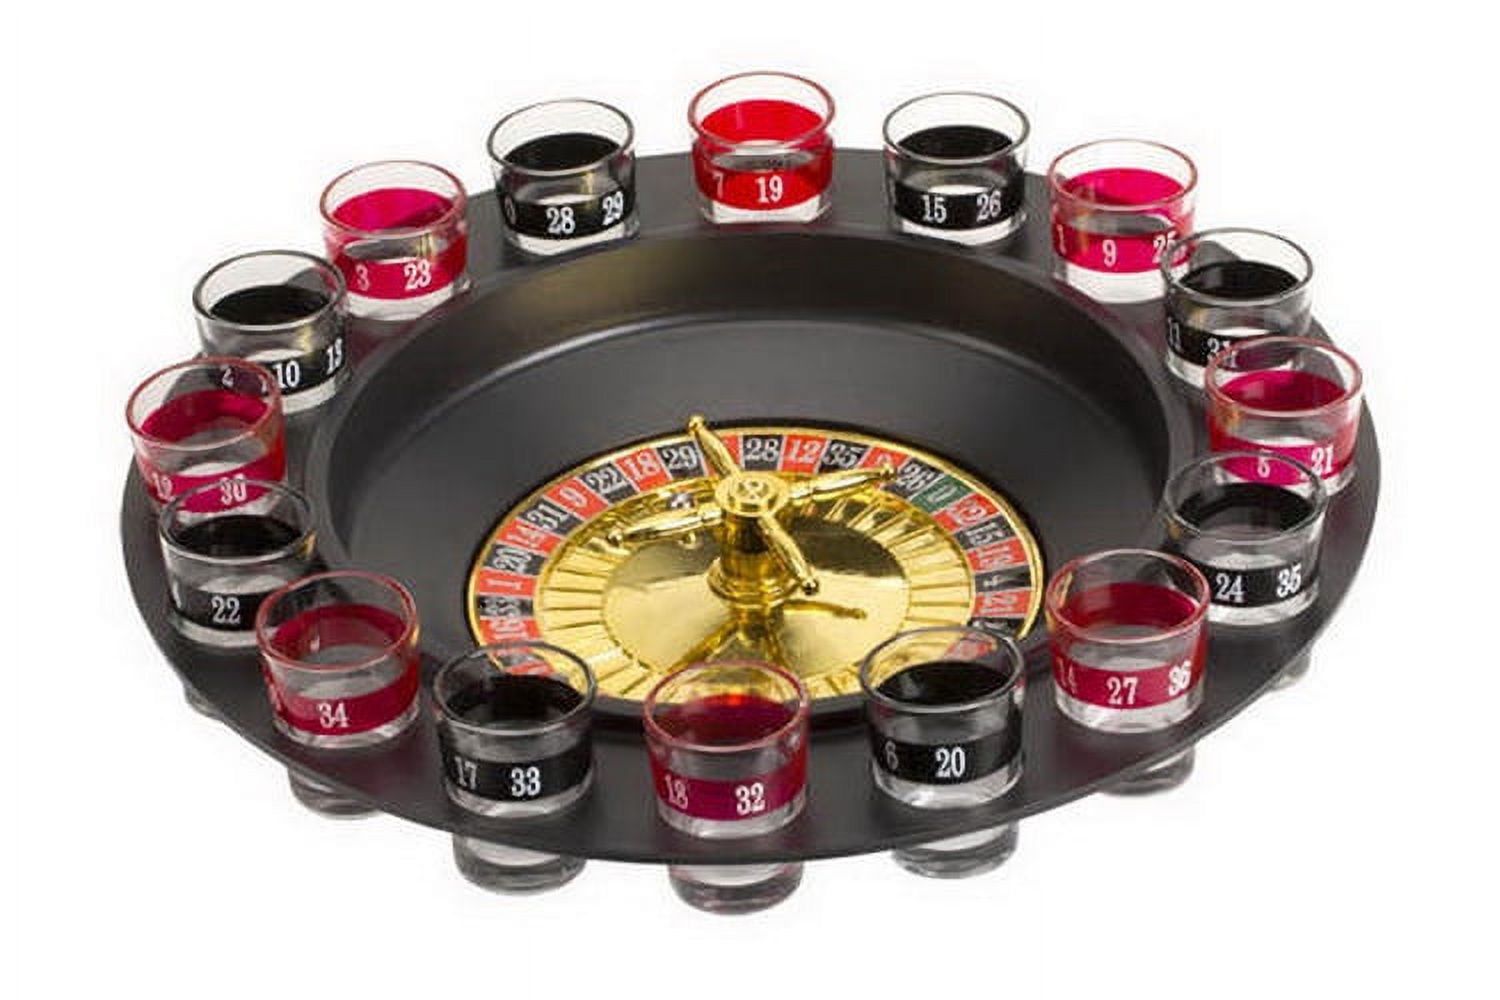 CHH 2192B Drking Roulette Set - image 1 of 2